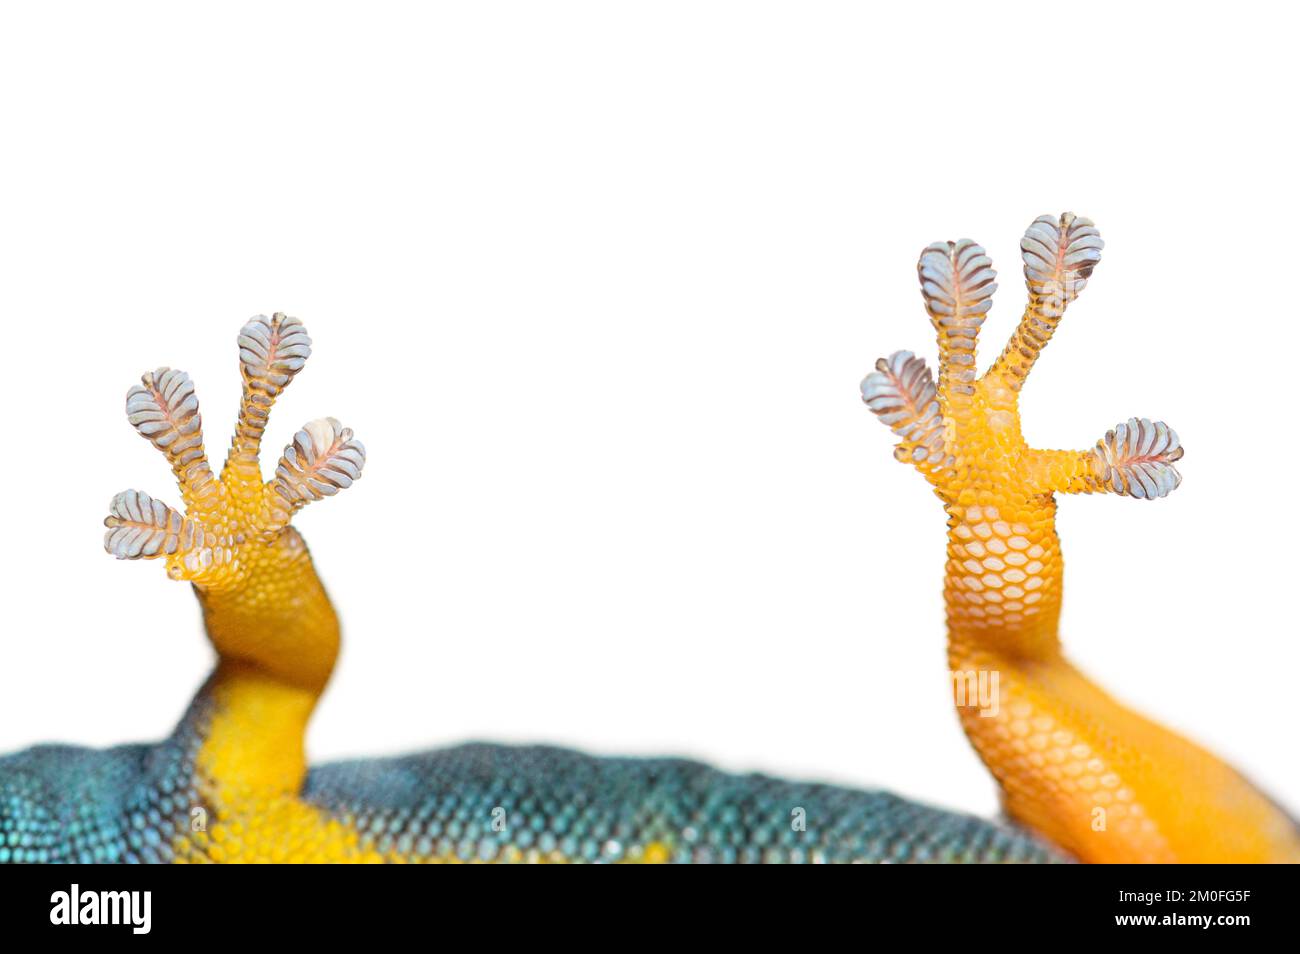 Bottom view of gecko toe-pads, Electric blue gecko showing, isolated on white Stock Photo